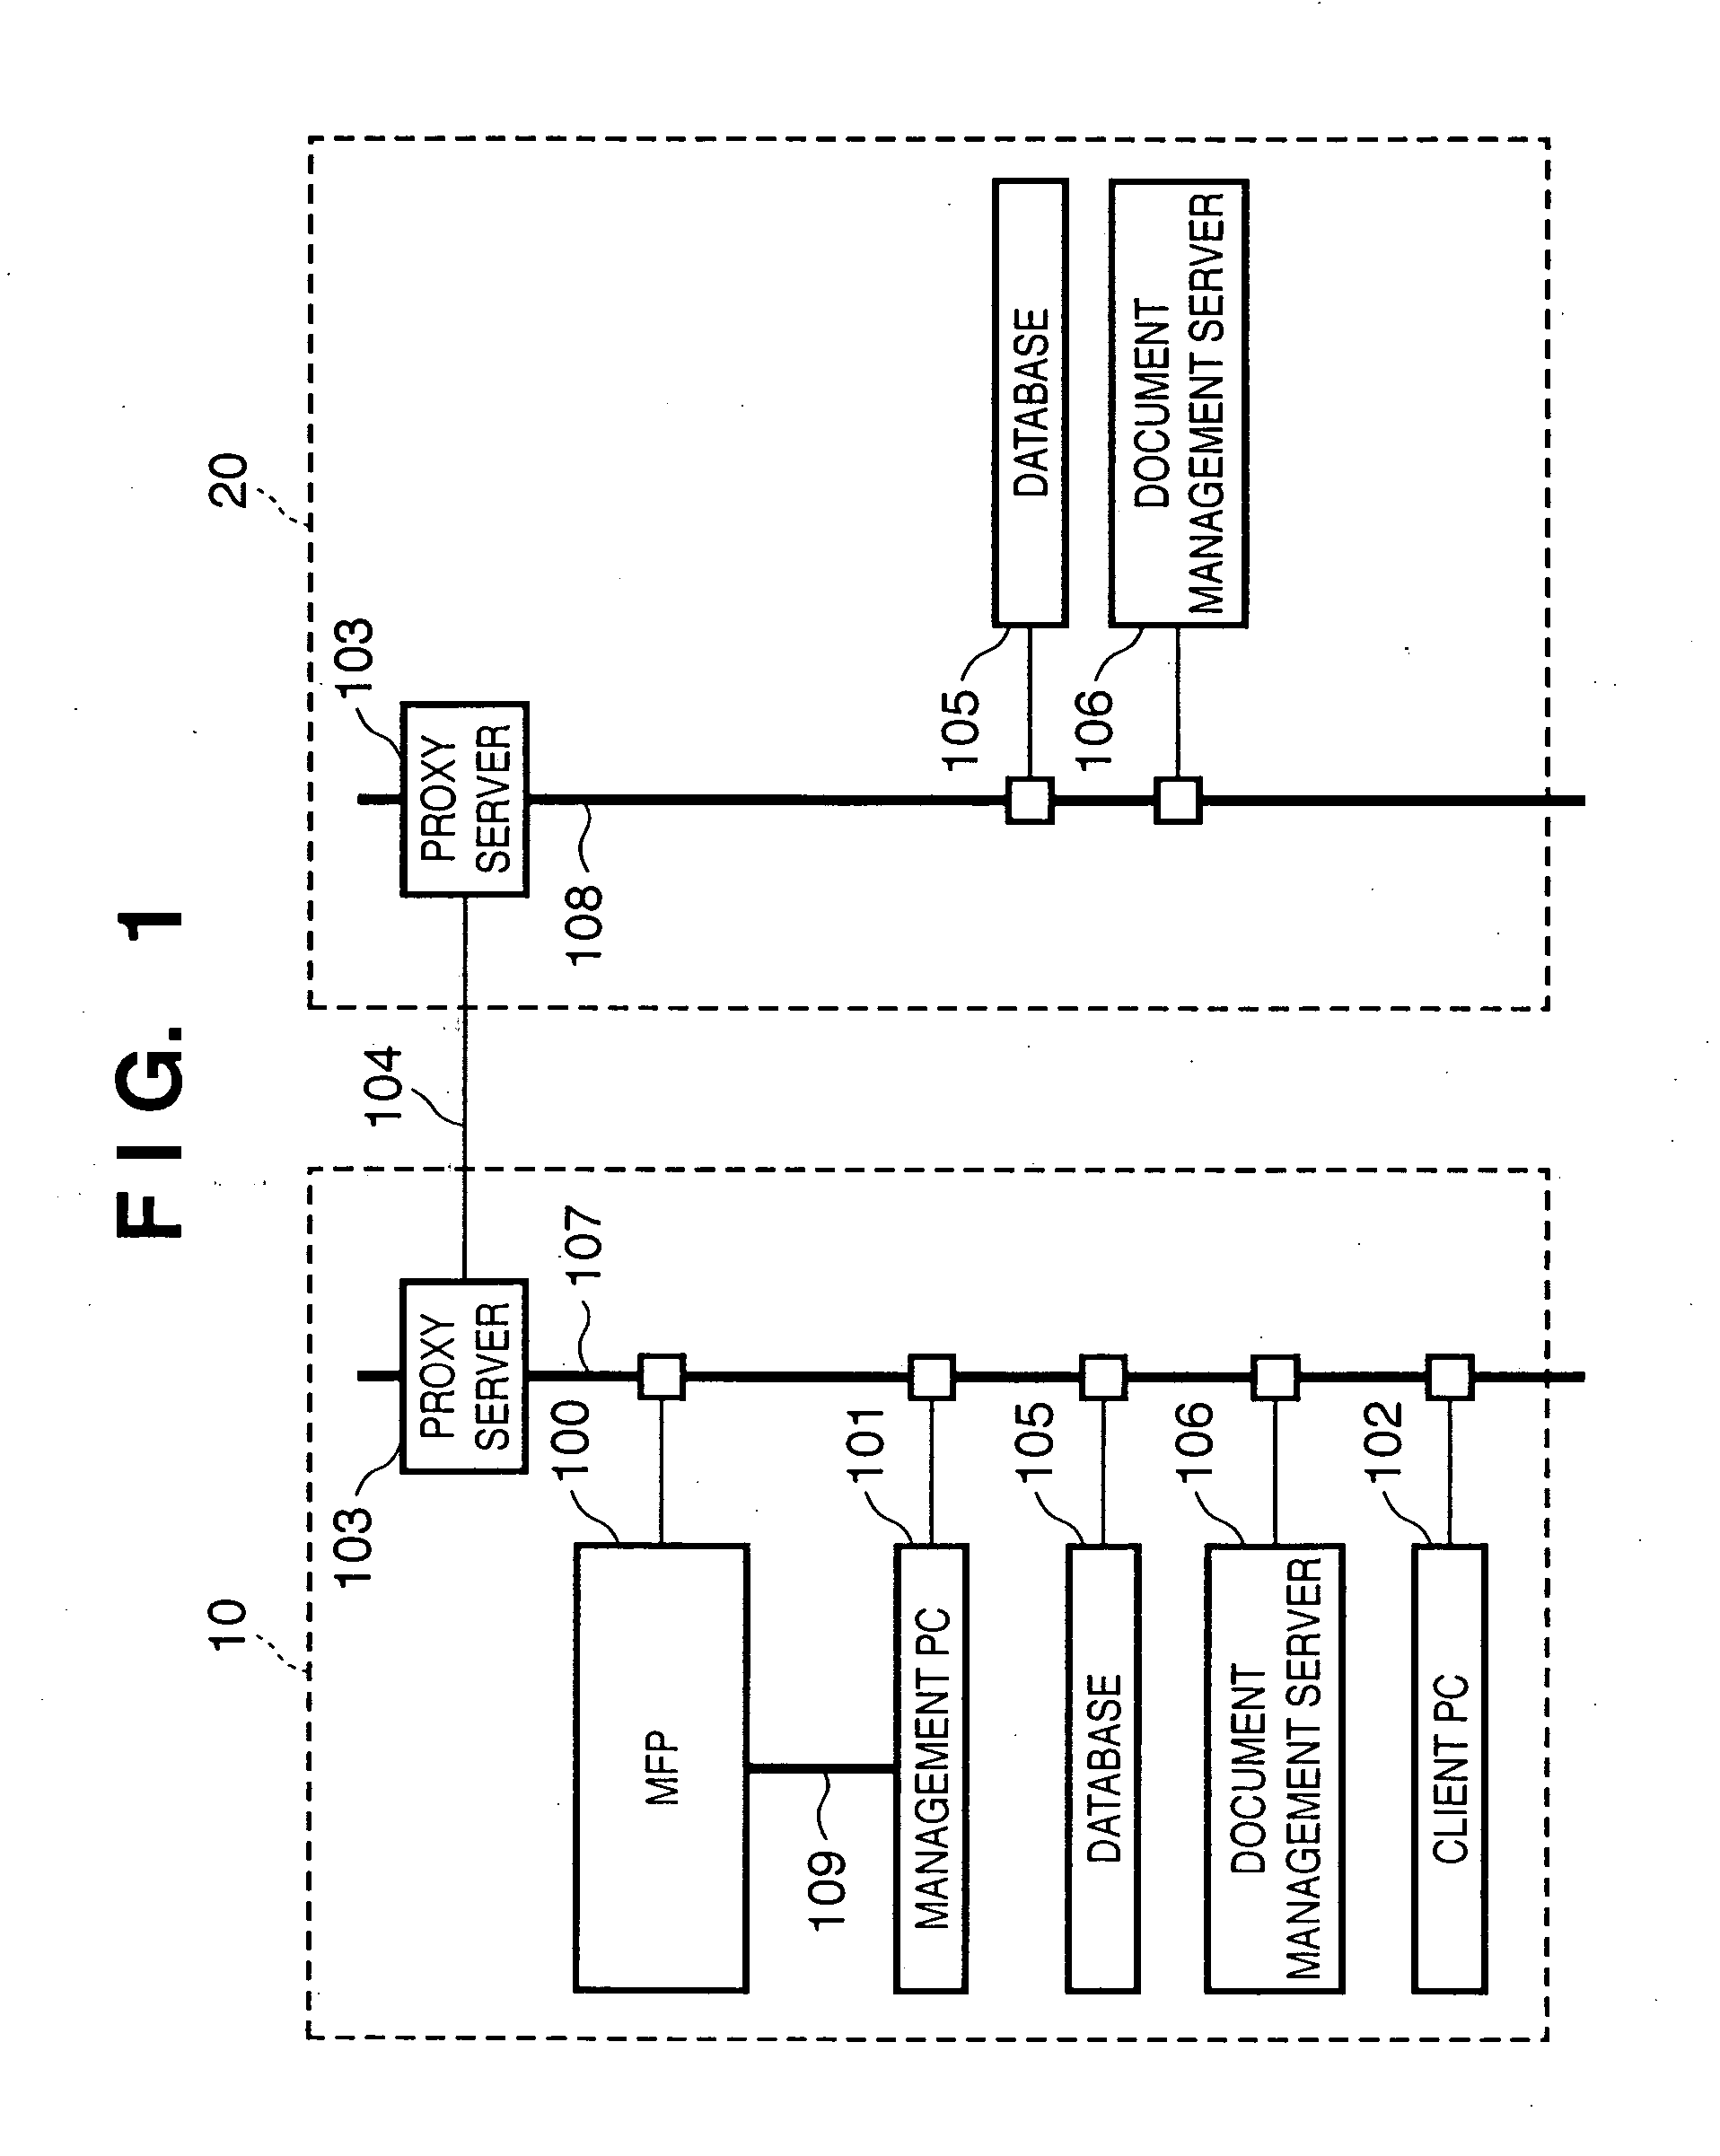 Image processing apparatus, control method therefor, and program